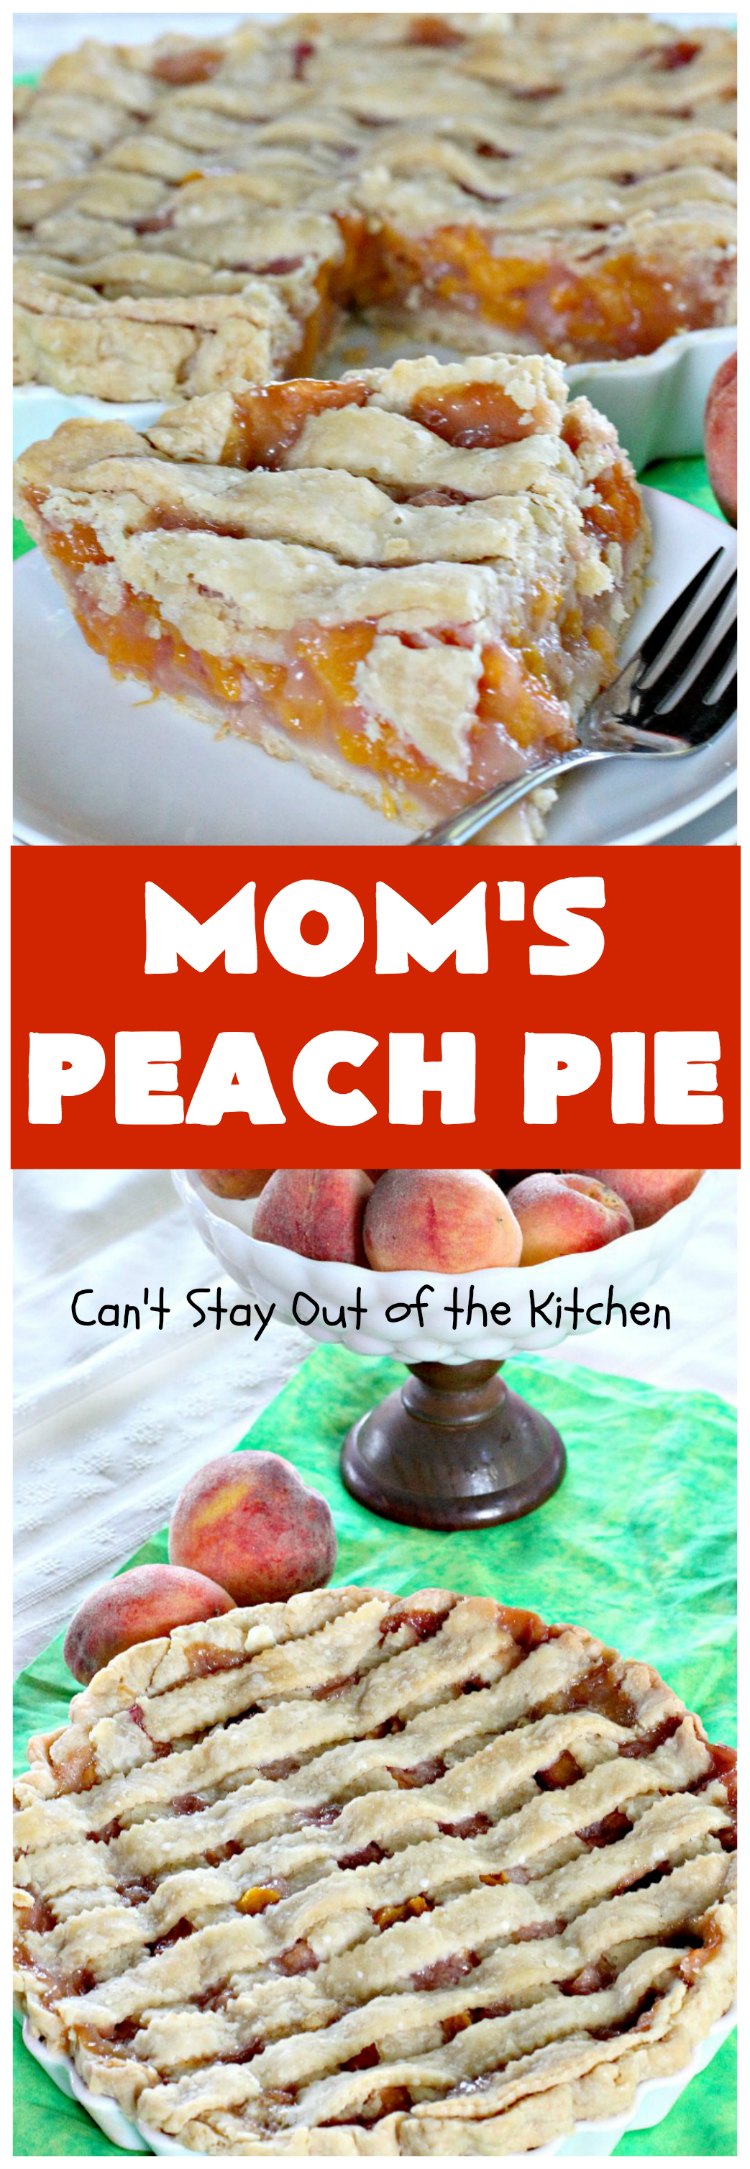 Mom's Peach Pie | Can't Stay Out of the KitchenMom's Peach Pie | Can't Stay Out of the Kitchen